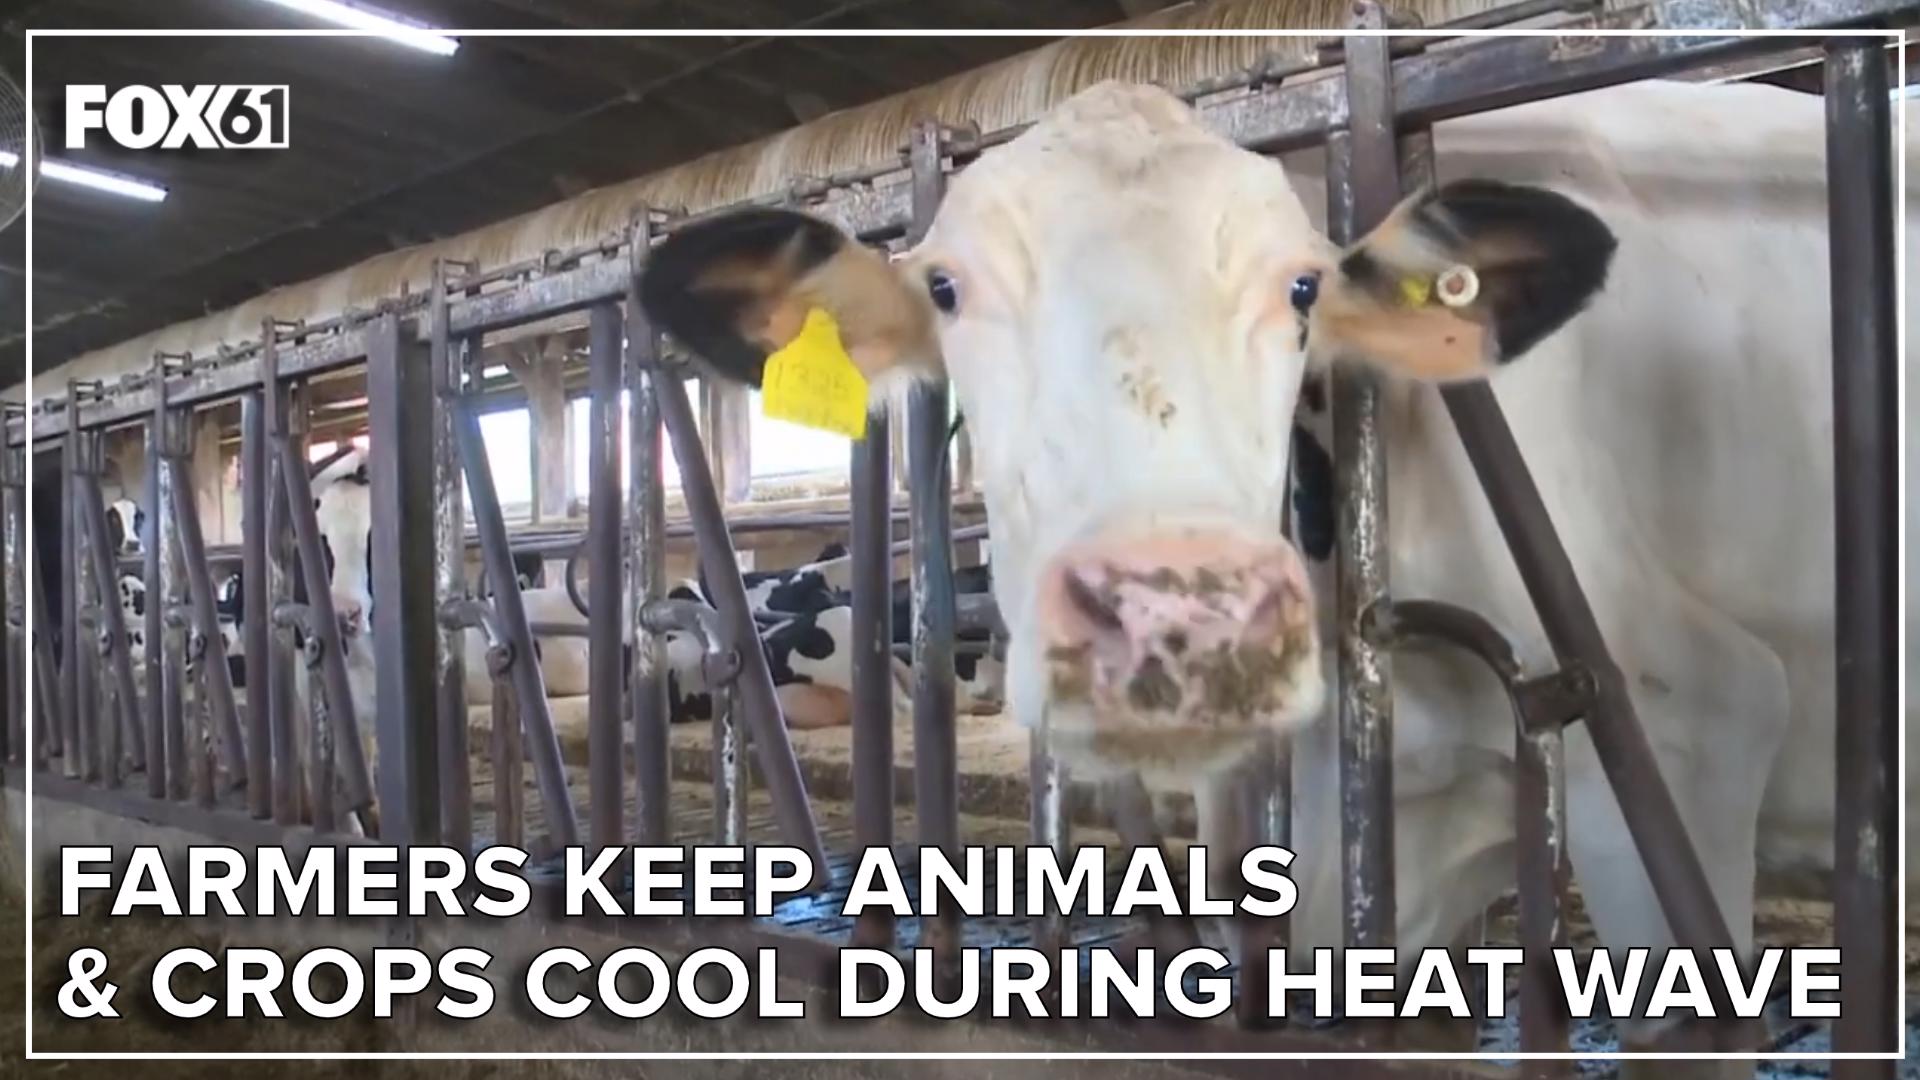 For farmers and farm animals across the state, the conditions call for special heat protocols.